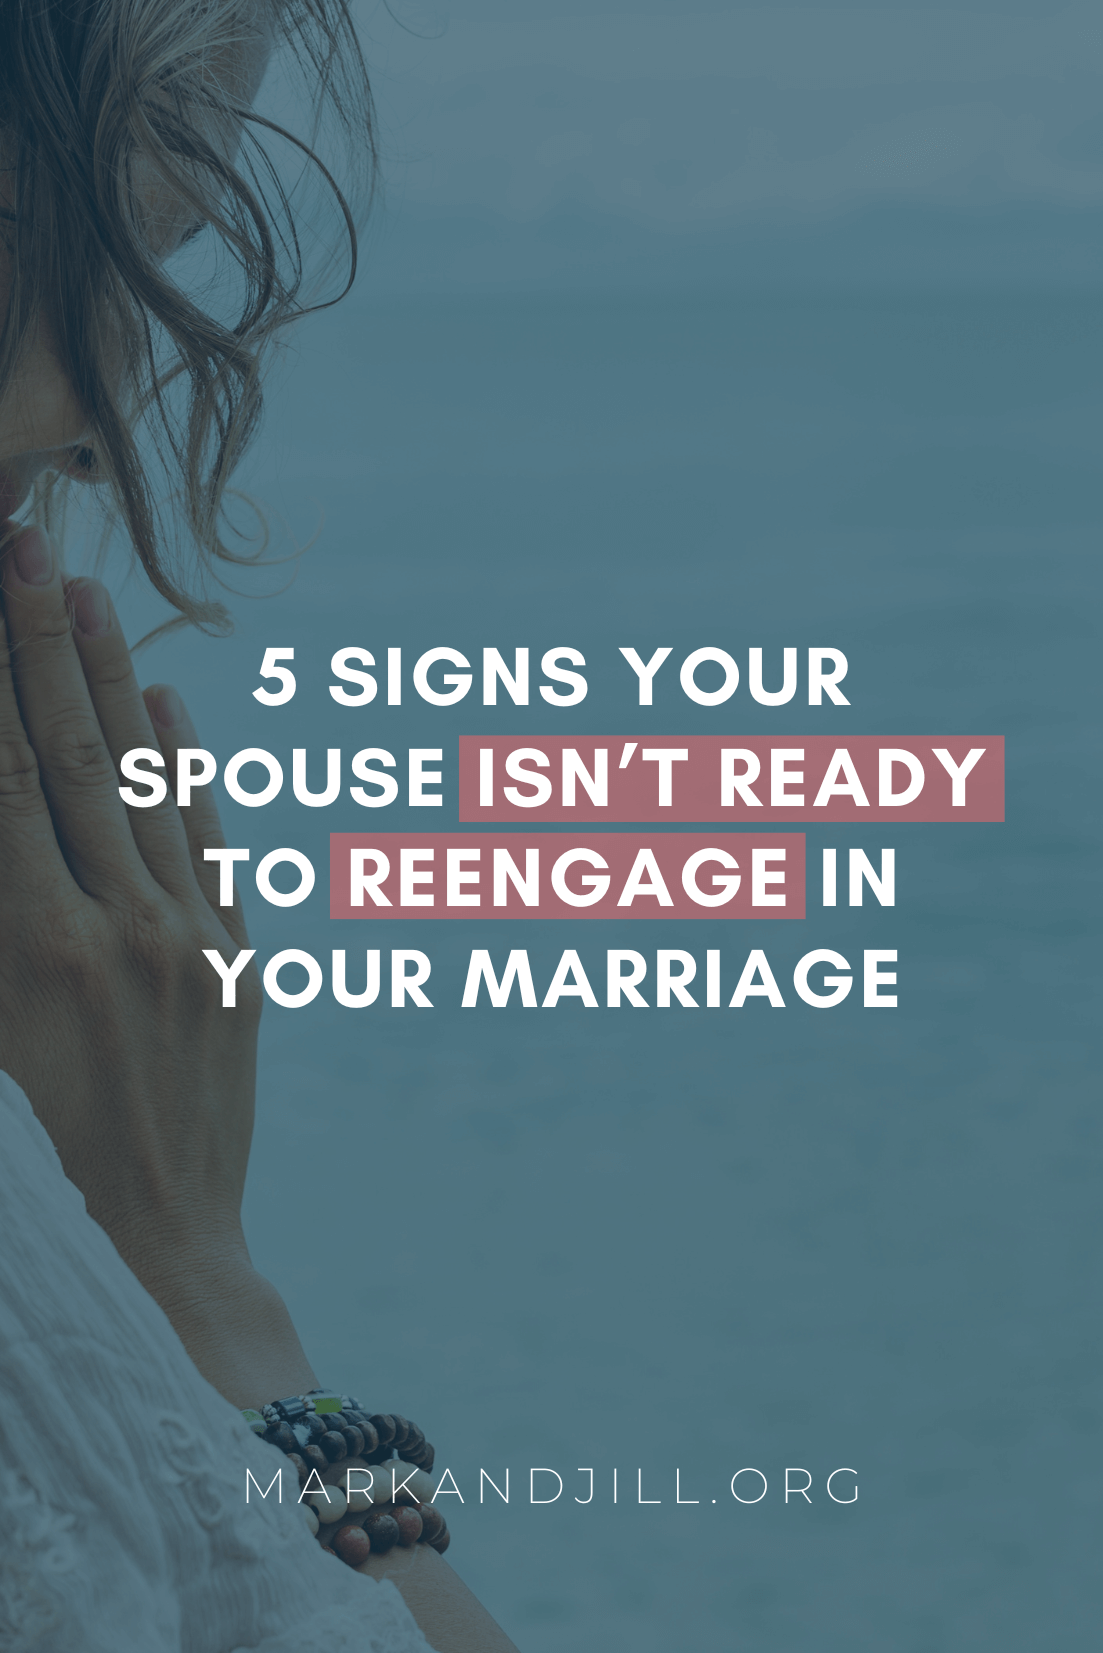 5 Signs Your Spouse Isn’t Ready to Reengage In Your Marriage | #MarriageMonday